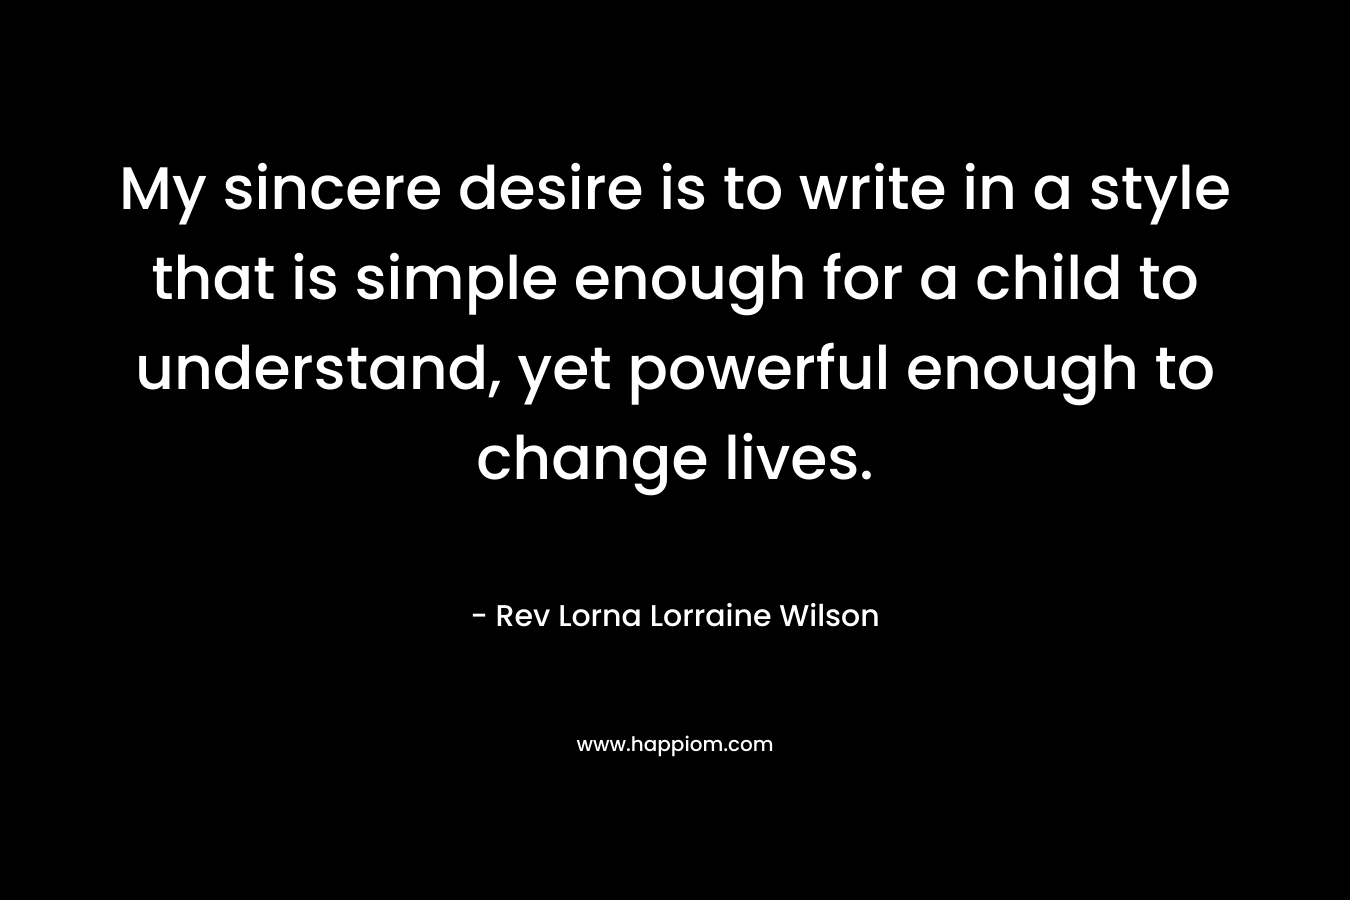 My sincere desire is to write in a style that is simple enough for a child to understand, yet powerful enough to change lives. – Rev Lorna Lorraine Wilson